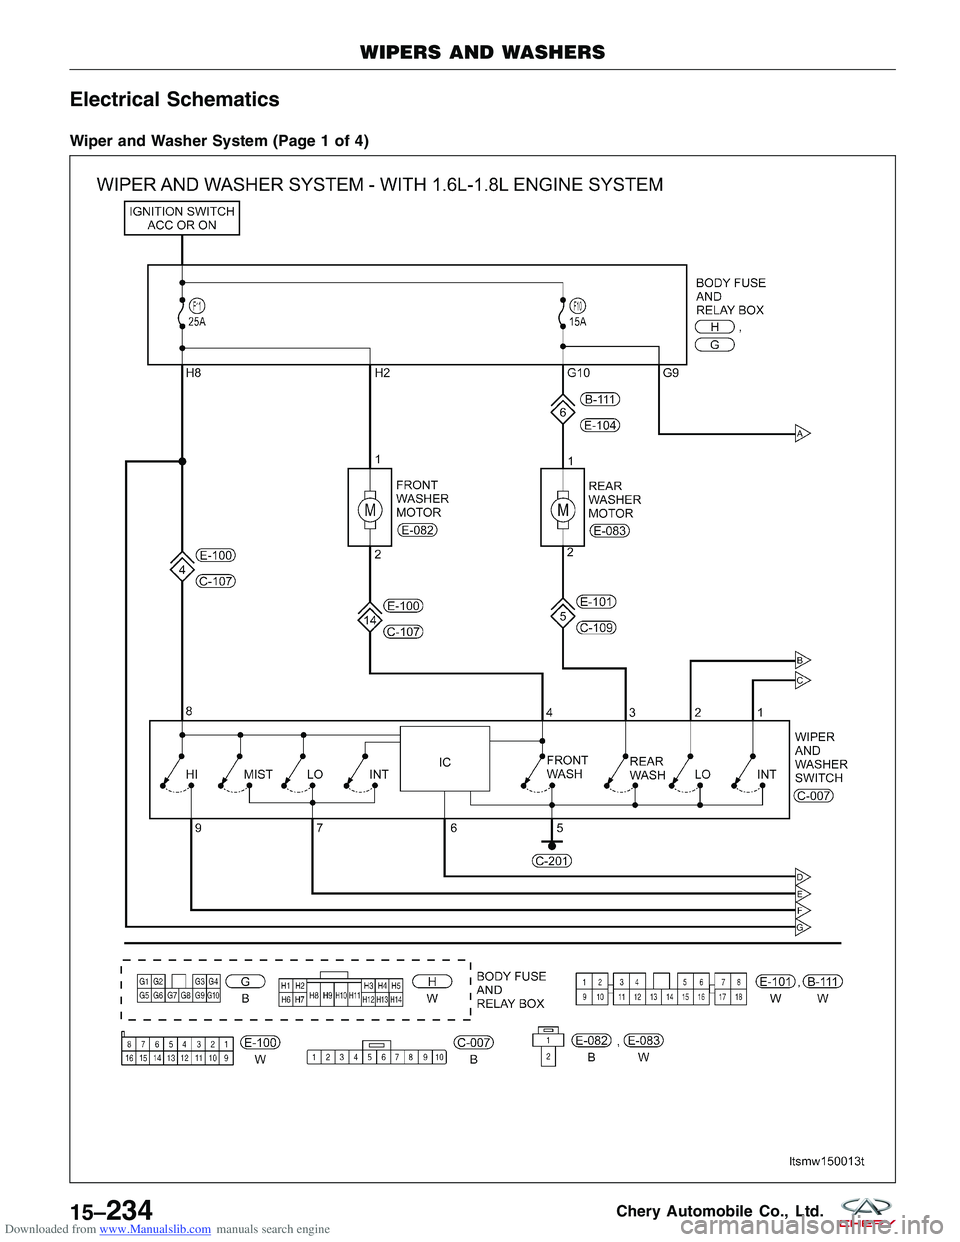 CHERY TIGGO 2009  Service Repair Manual Downloaded from www.Manualslib.com manuals search engine Electrical Schematics
Wiper and Washer System (Page 1 of 4)
WIPERS AND WASHERS
LTSMW150013T
15–234Chery Automobile Co., Ltd.  